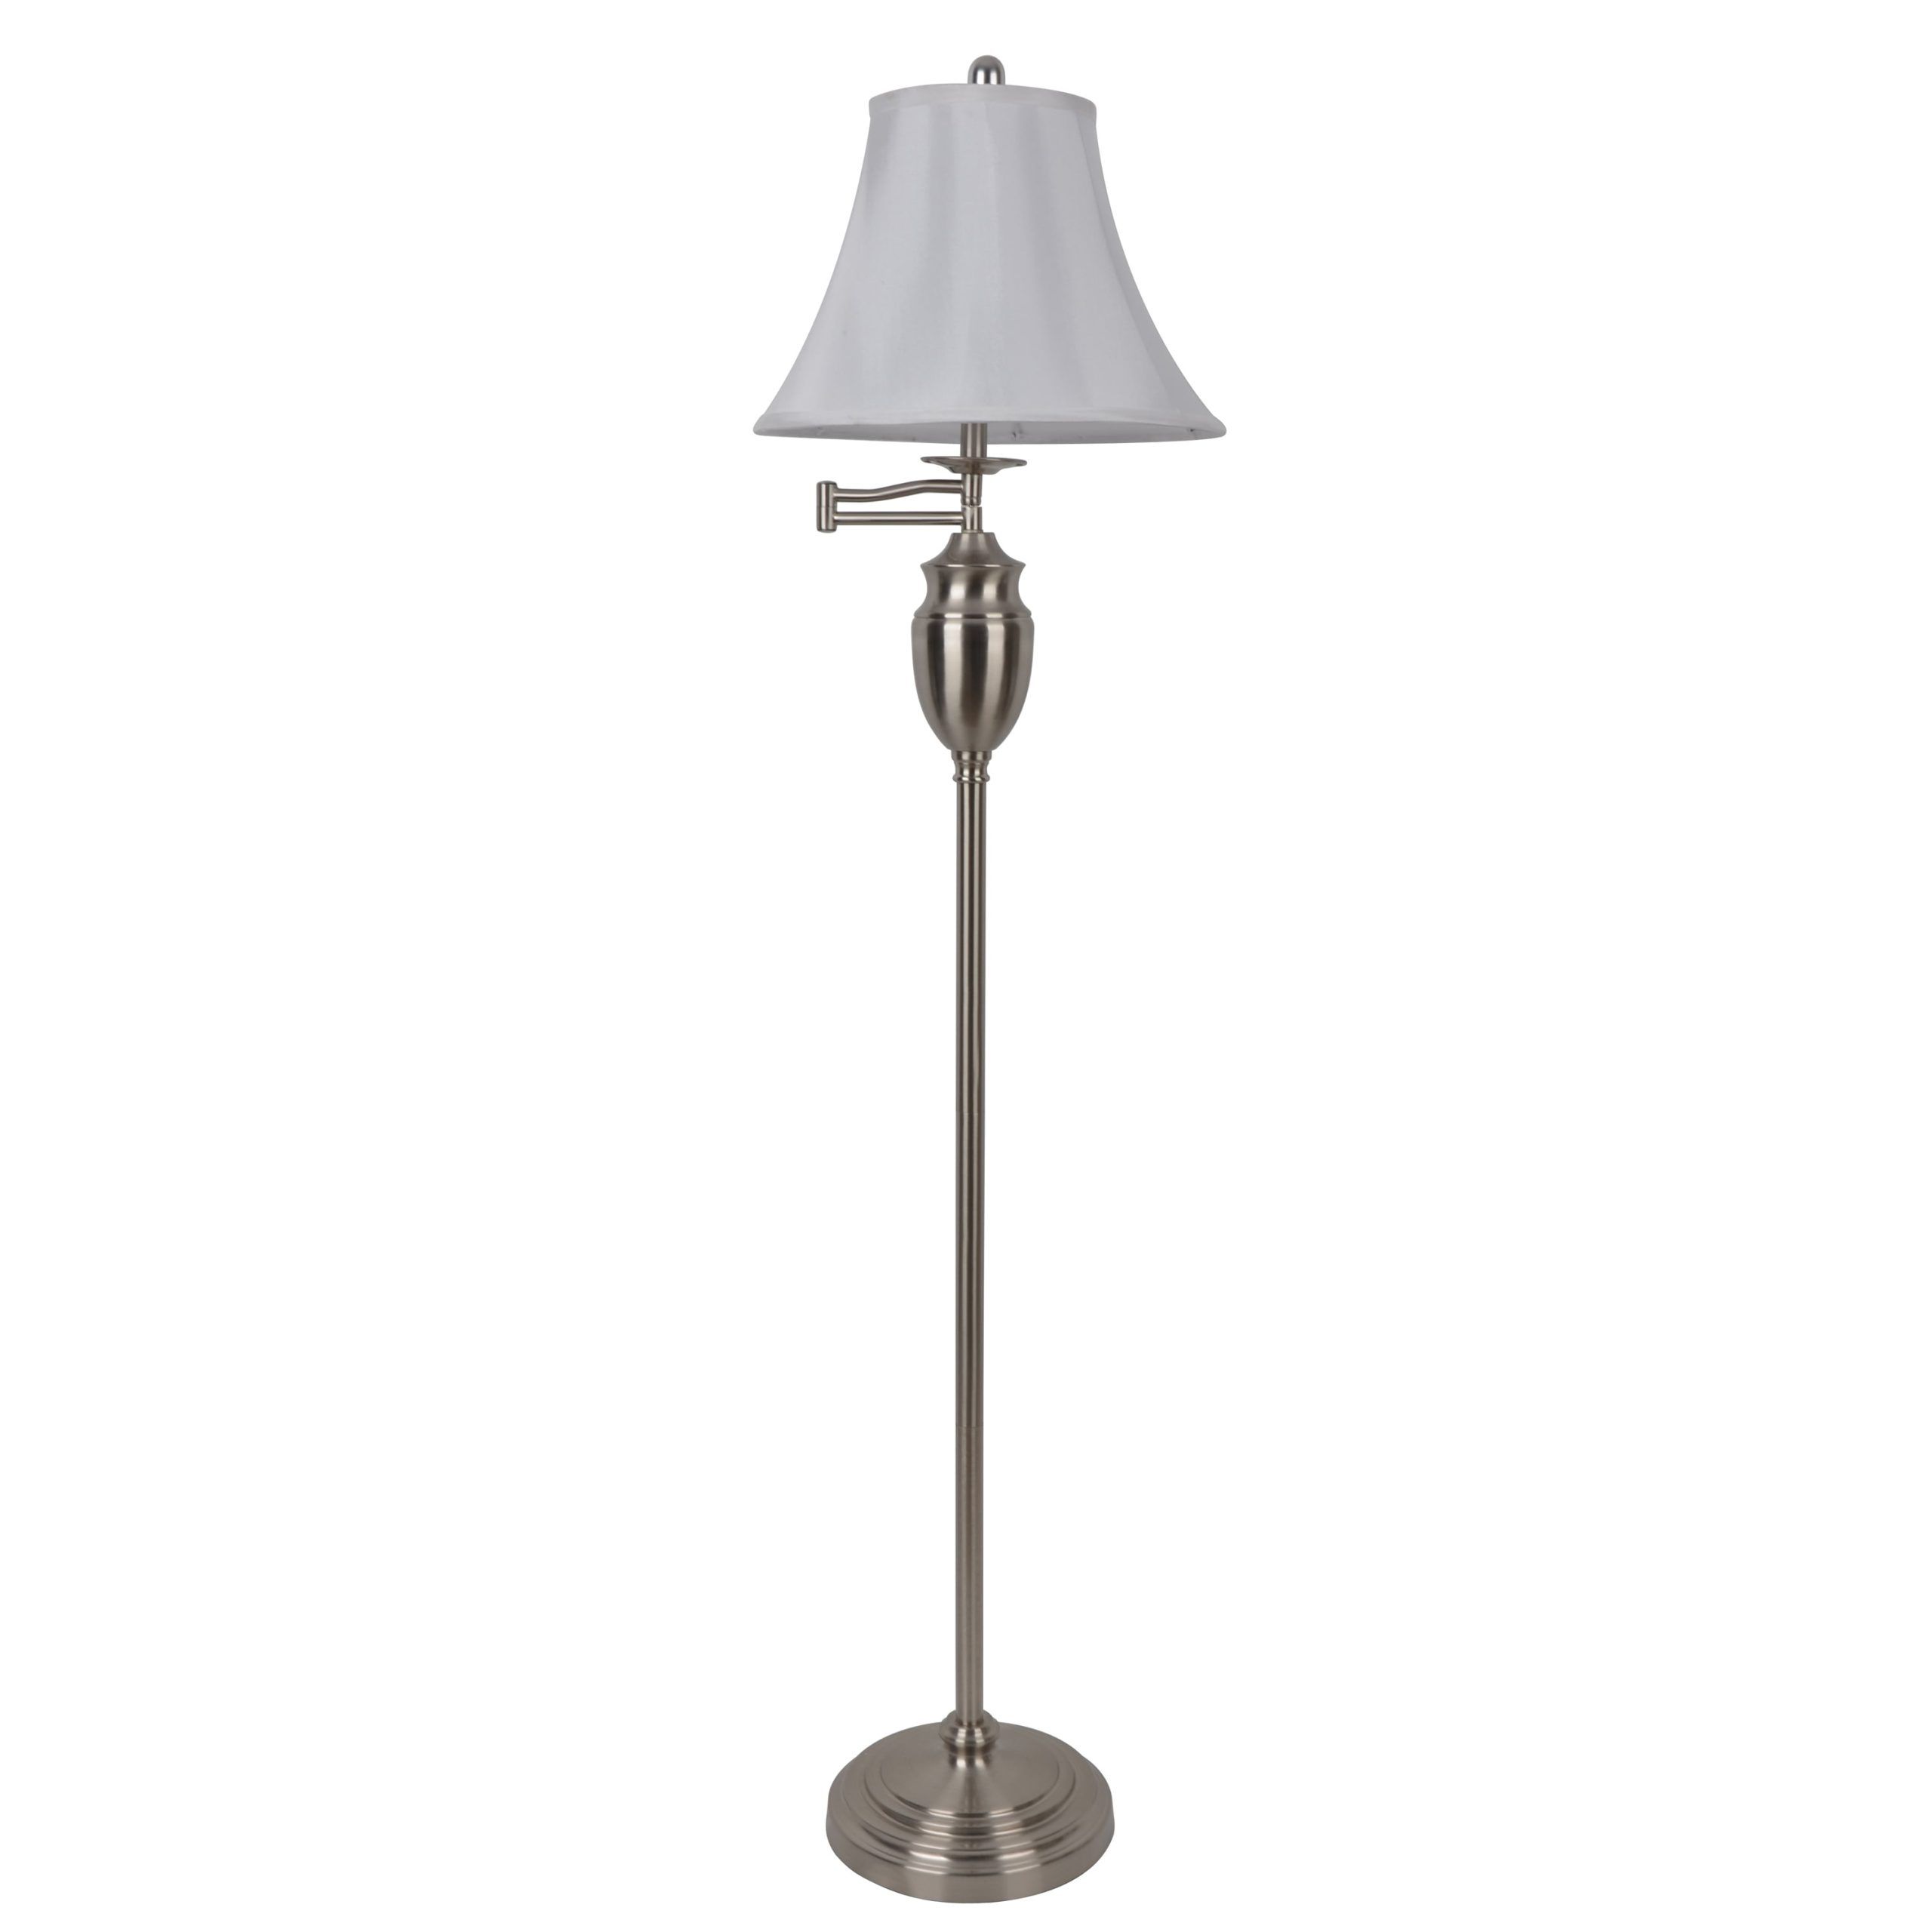 Fashionable Decor Therapy Wellington Steel Swing Arm Floor Lamp – Walmart Within Adjustble Arm Standing Lamps (View 15 of 15)